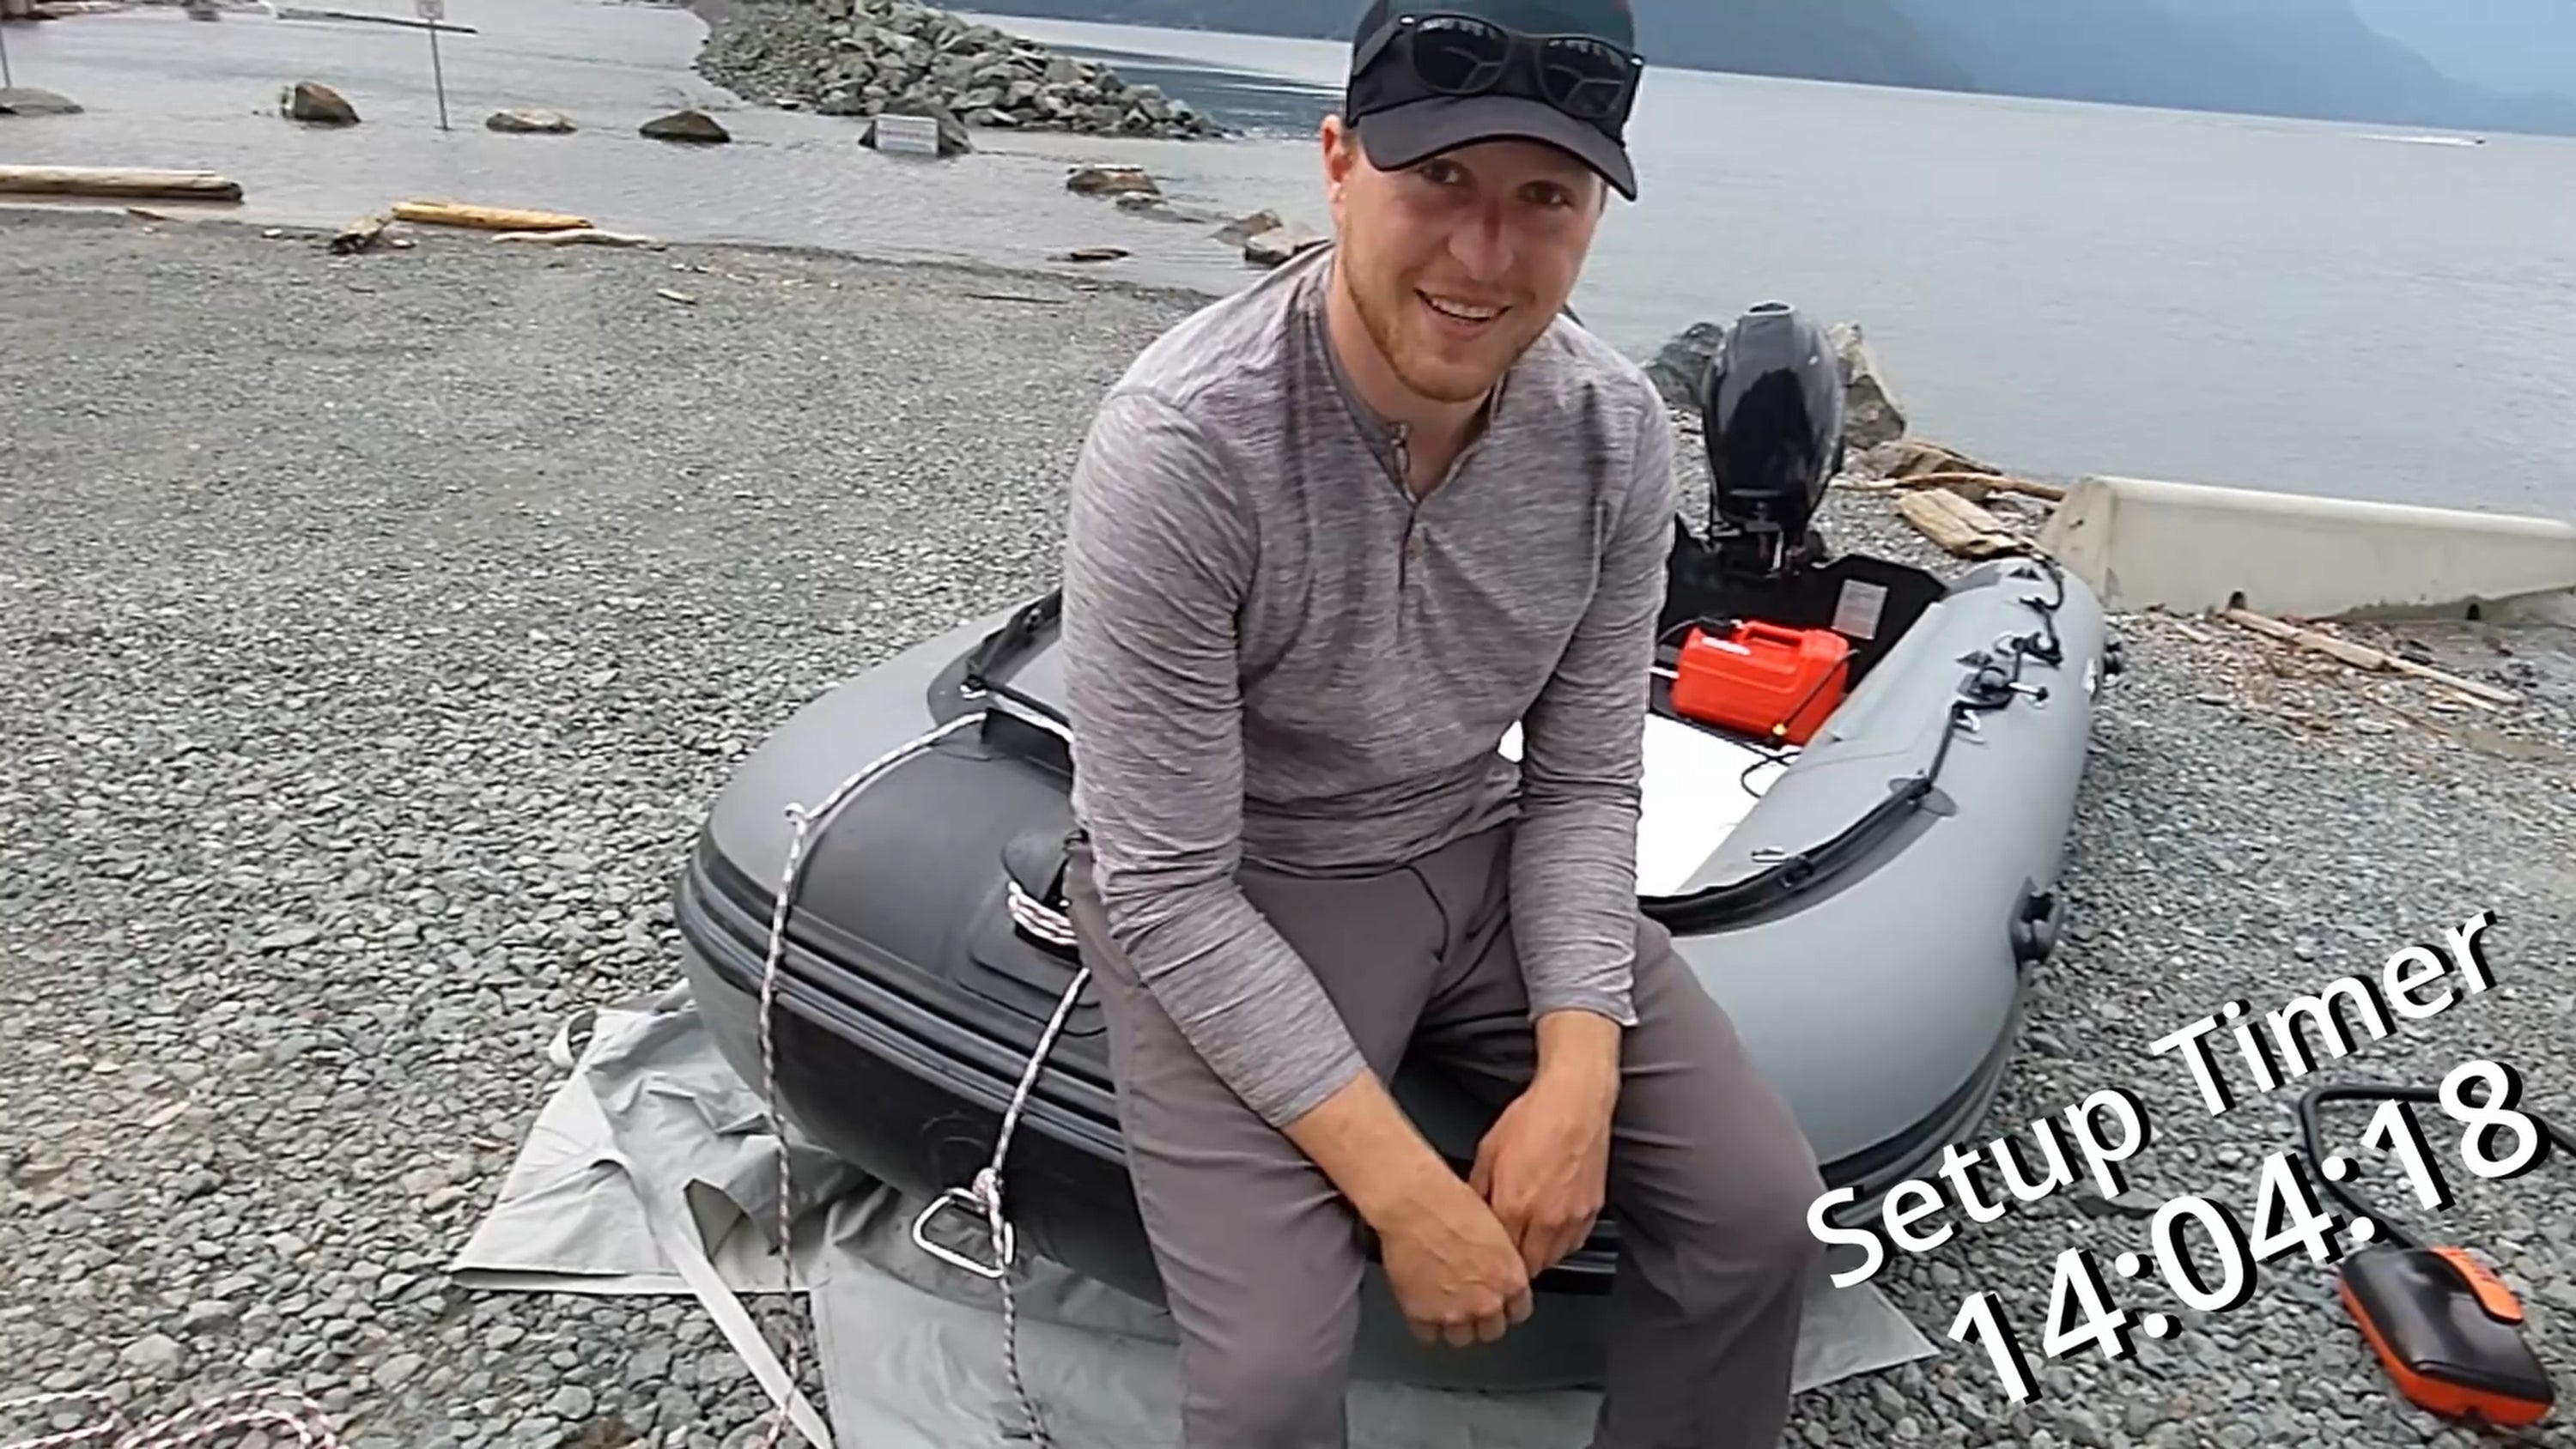 Clay of Aquatic Monkeys shows us how quick it is to set up a Swellfish Classic Inflatable Boat